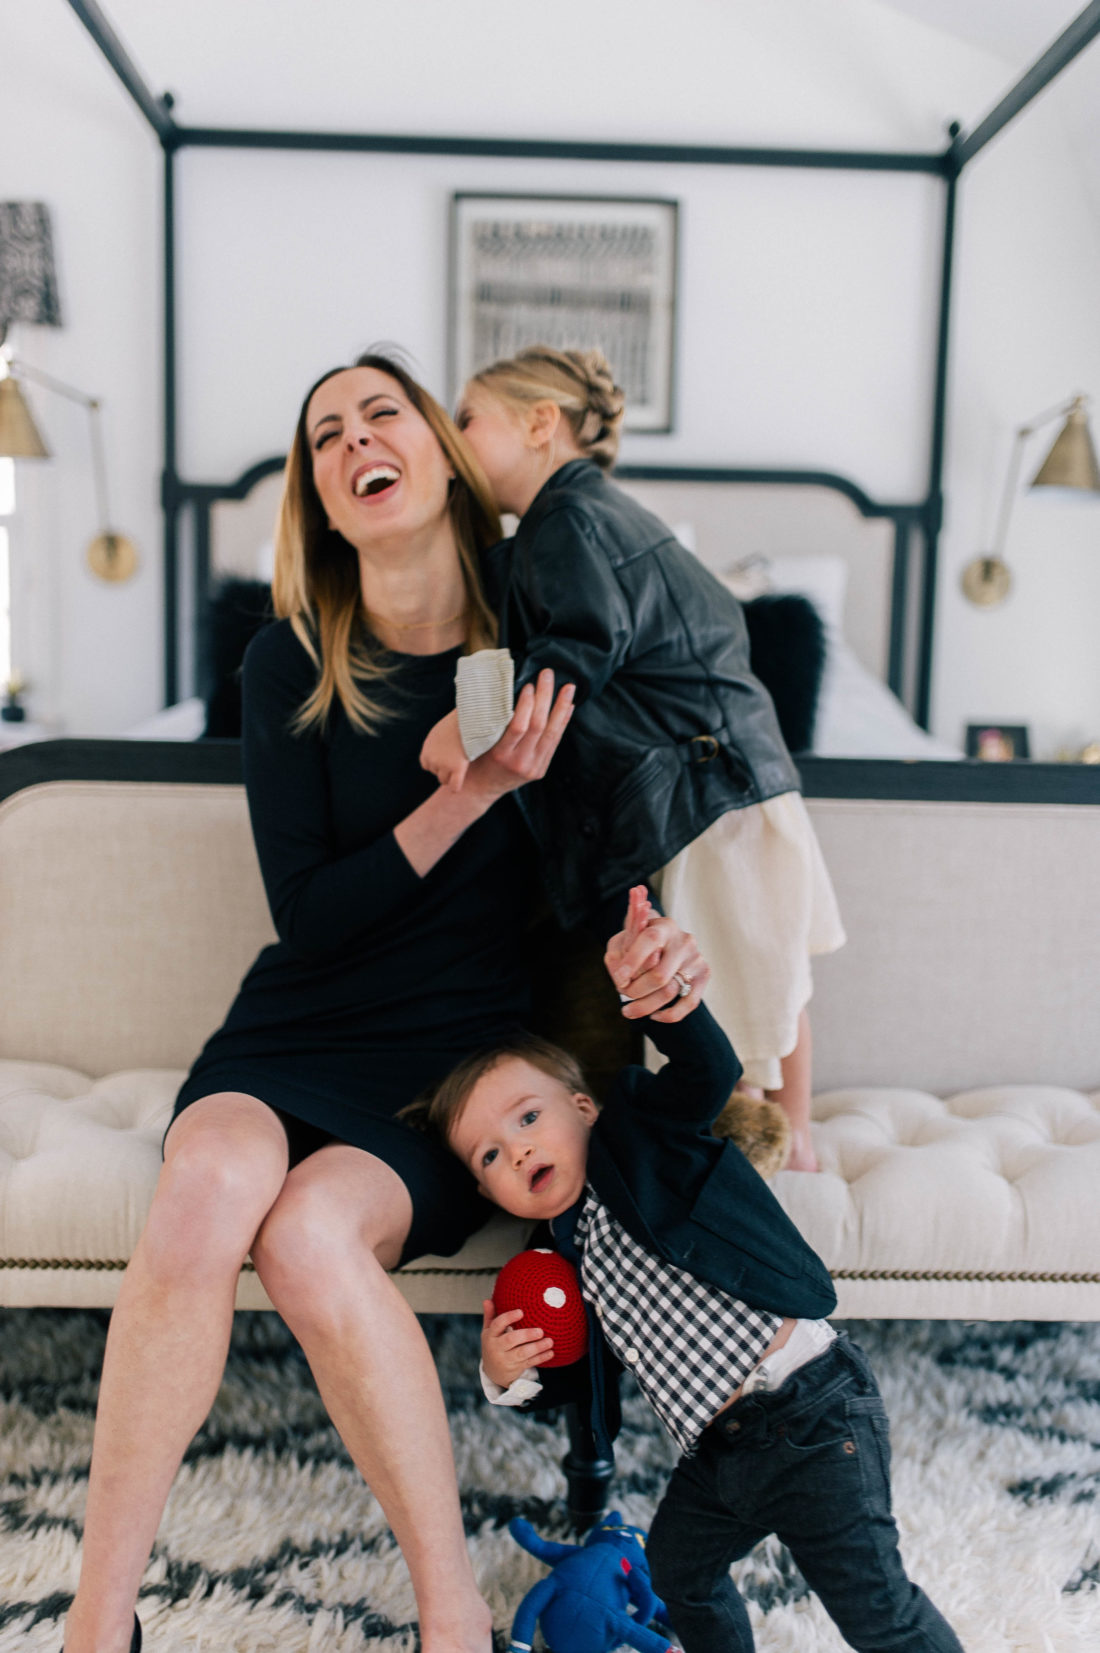 Eva Amurri Martino laughs with her daughter Marlowe and son Major at the foot of her bed in her house in Connecticut.